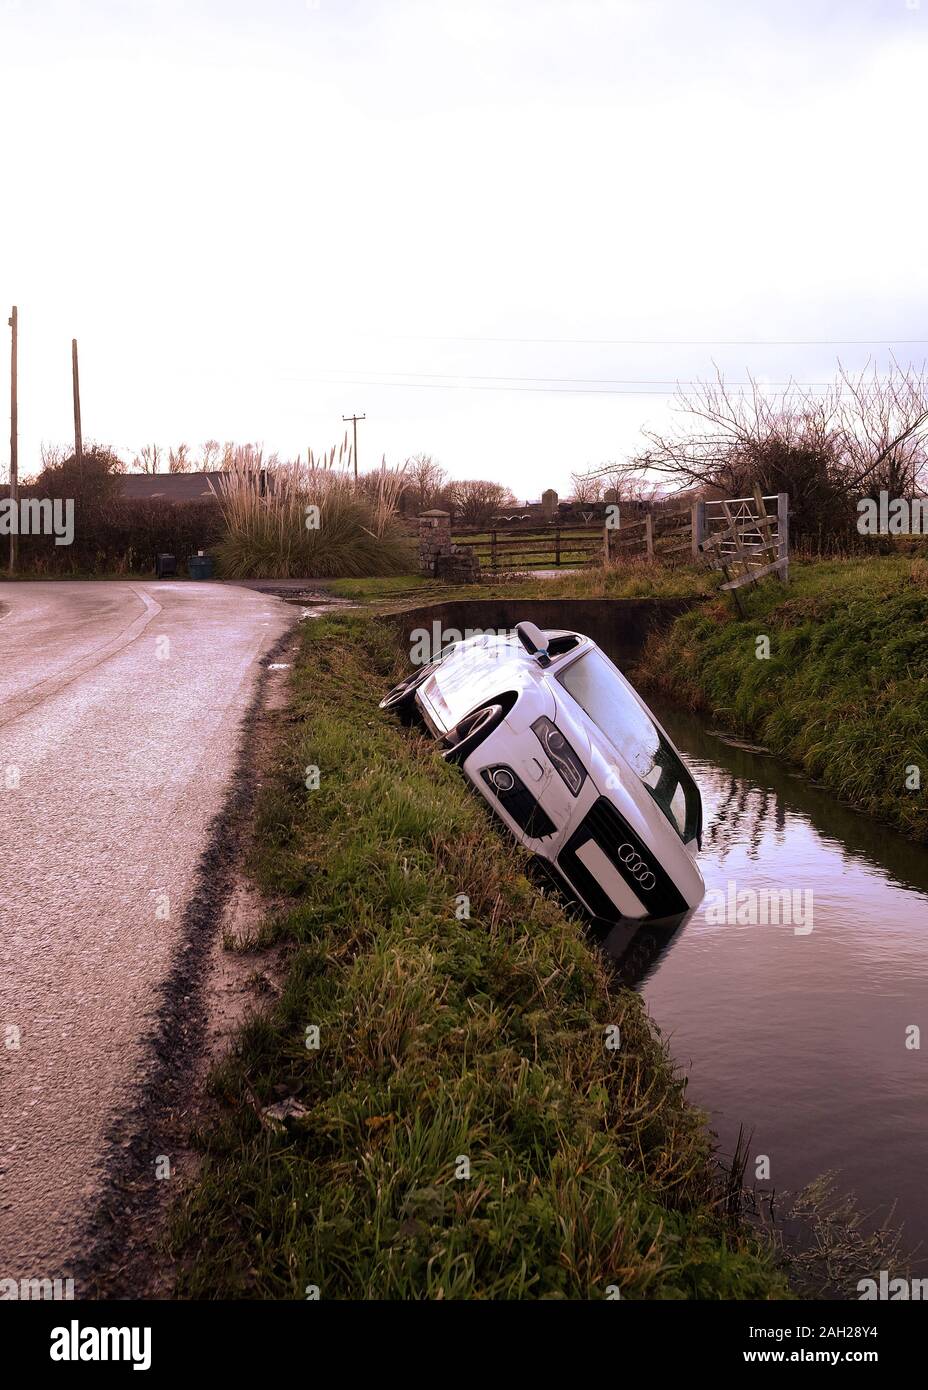 Christmas 2019 - White Audi A5 Saloon in a rural ditch at Christmas Stock Photo